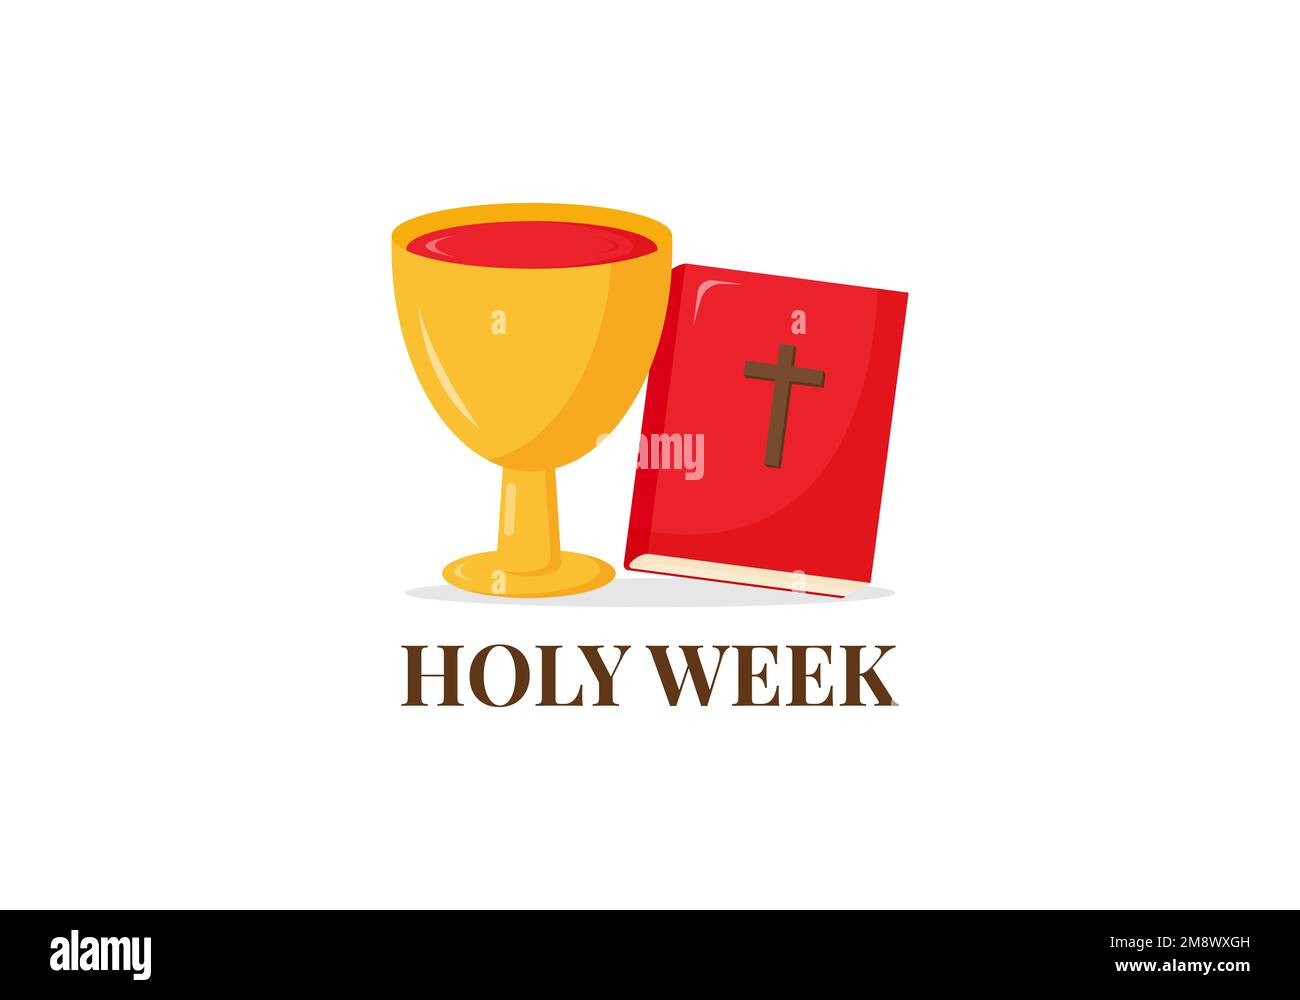 christian-greeting-card-or-banner-of-the-holy-week-before-easter-wine